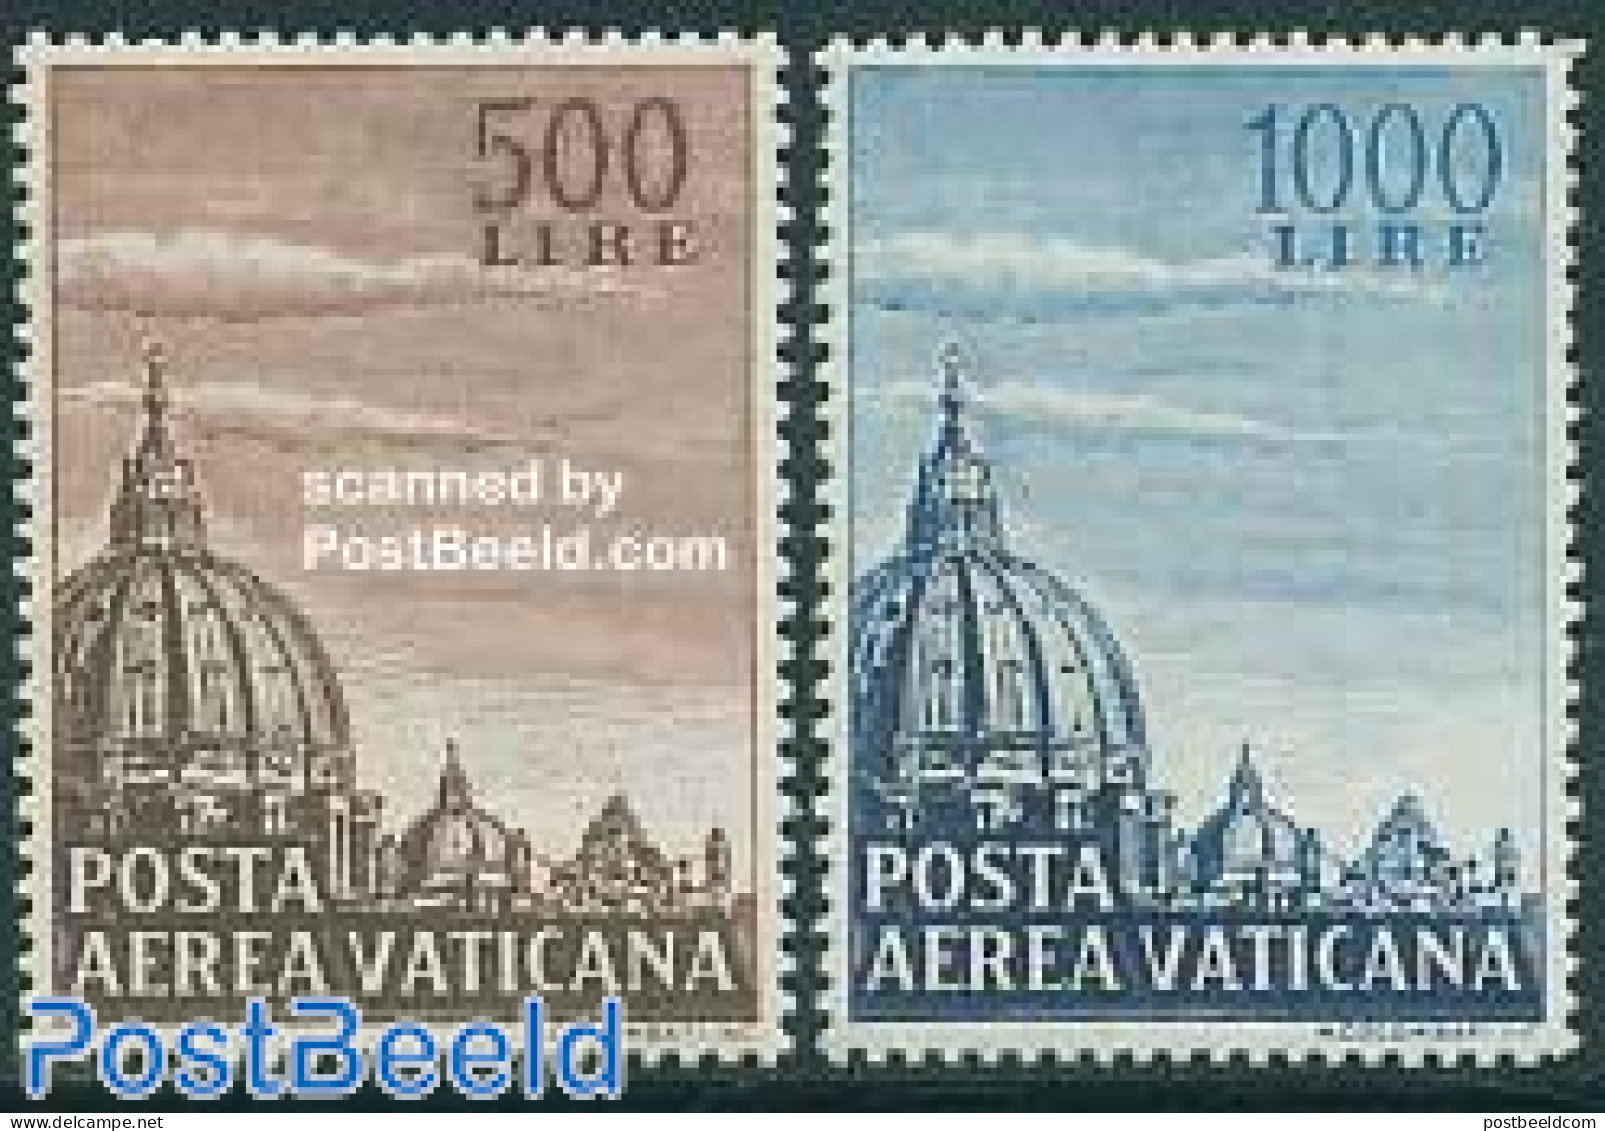 Vatican 1953 Airmail Definitives 2v, Mint NH, Religion - Churches, Temples, Mosques, Synagogues - Nuovi